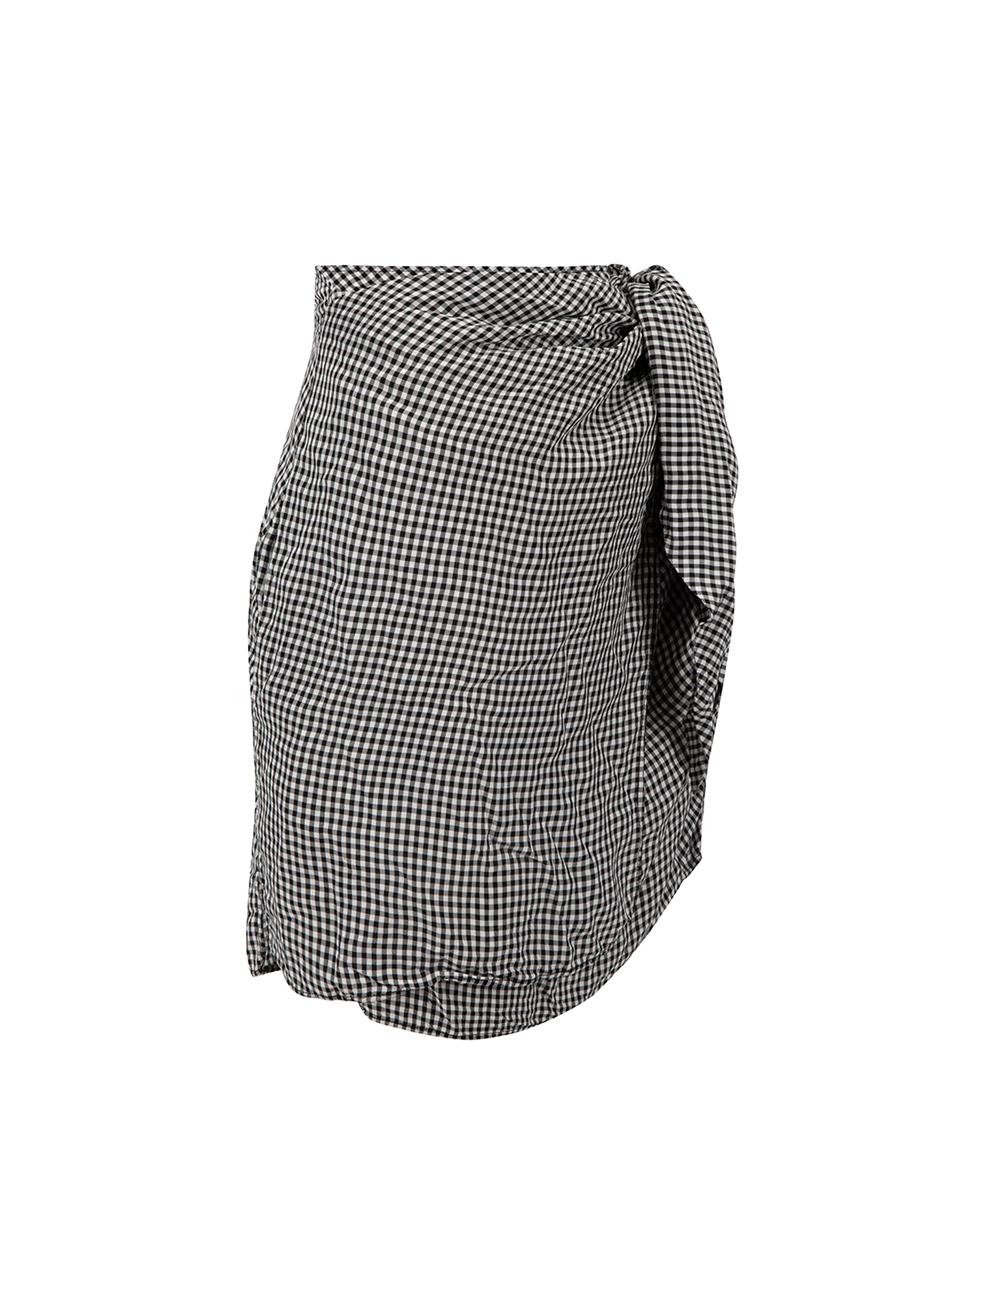 CONDITION is Very good. Hardly any visible wear to skirt is evident on this used Altuzarra designer resale item.



Details


Black

Cotton

Wrap skirt

Gingham pattern

Mini

2x Side pockets

Wrap tie fastening







Composition

NO COMPOSITION